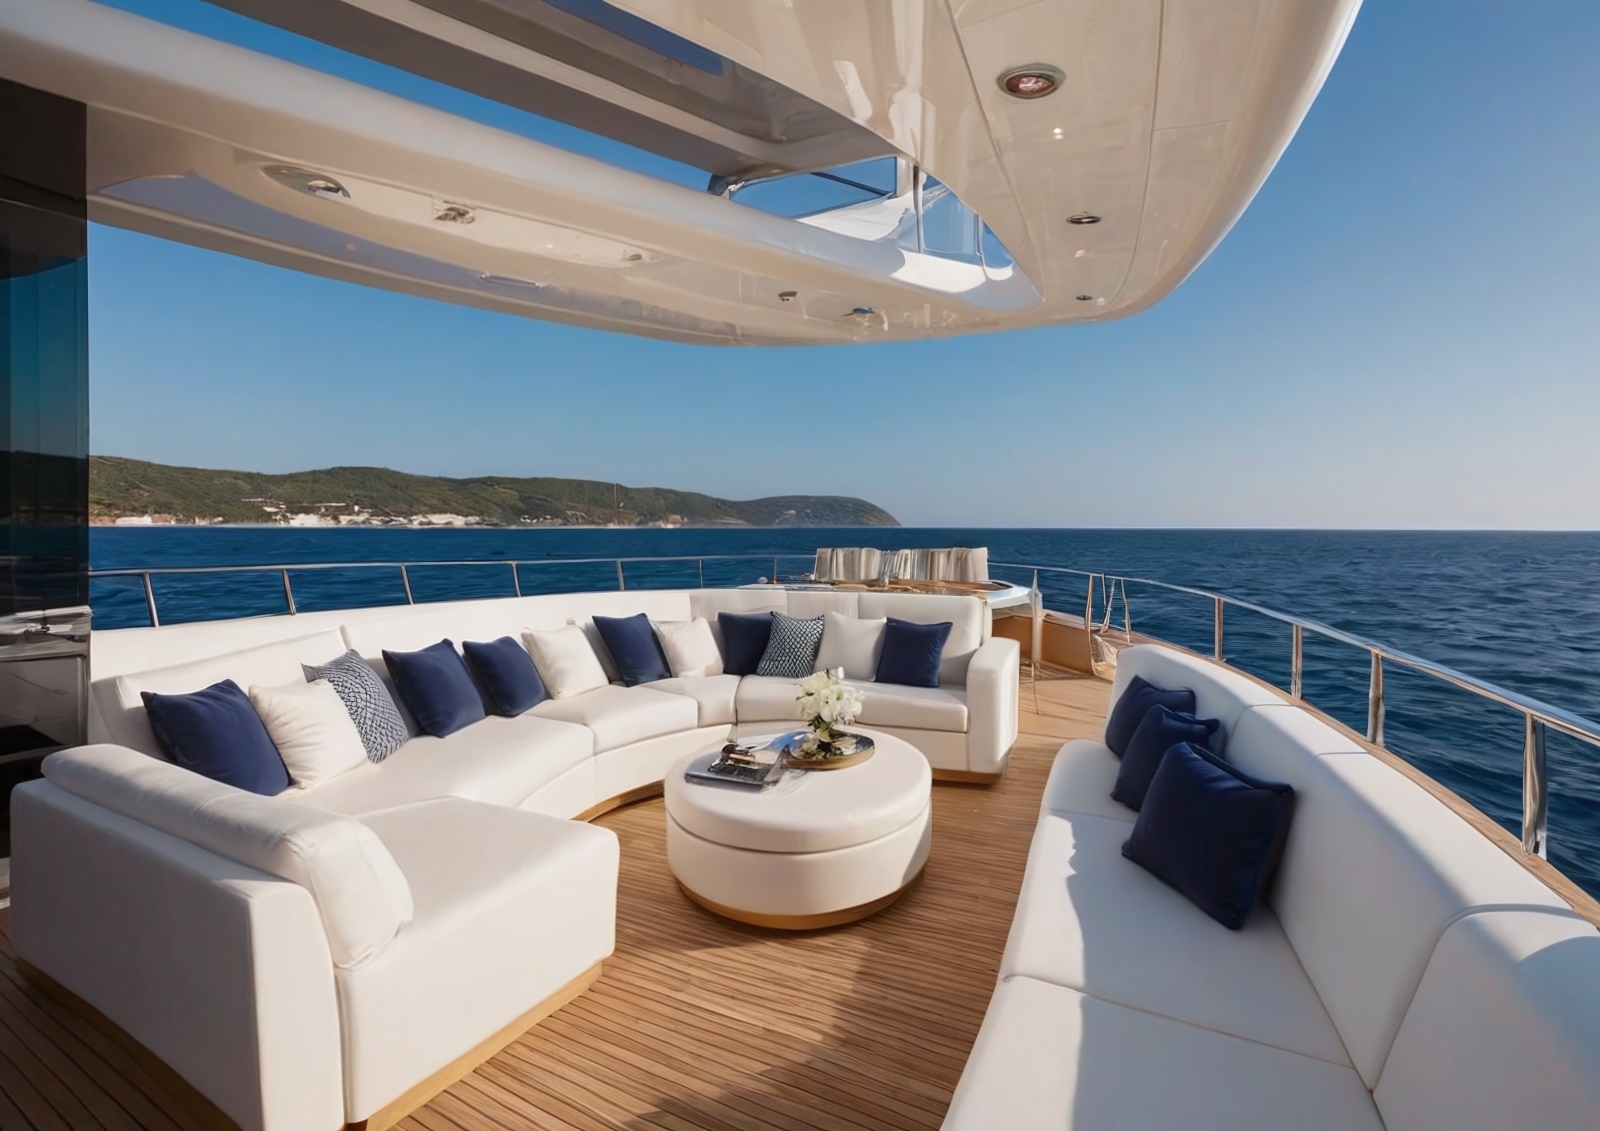 The Top 10 Luxury Yacht Brands